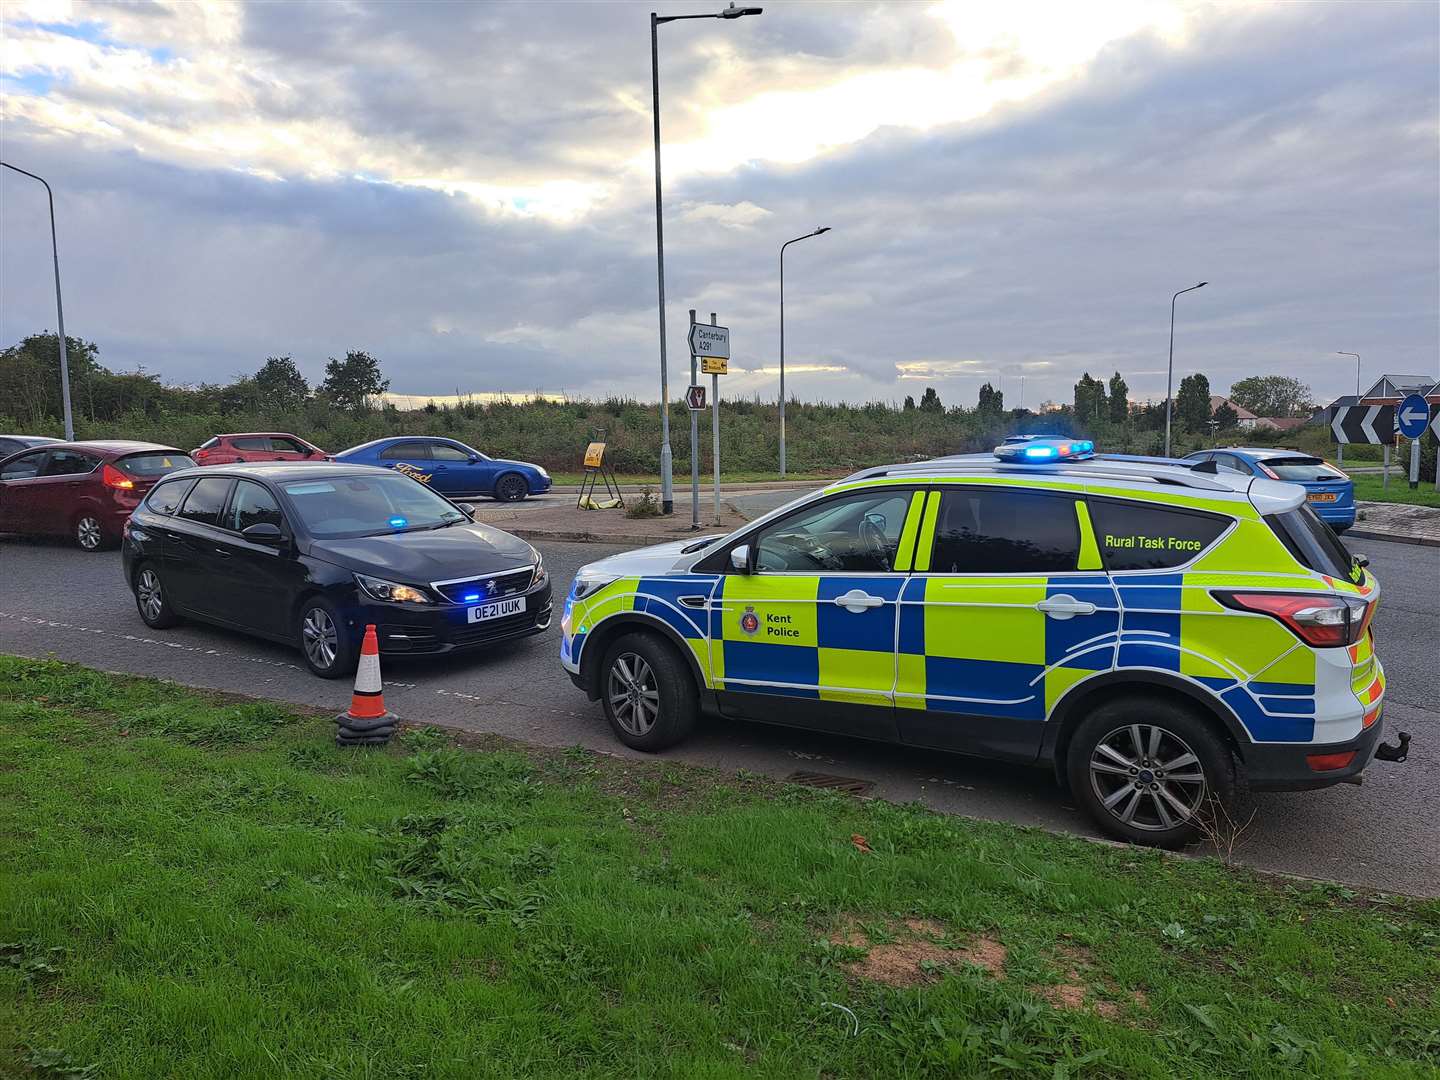 Police vehicles have stopped on Herne roundabout